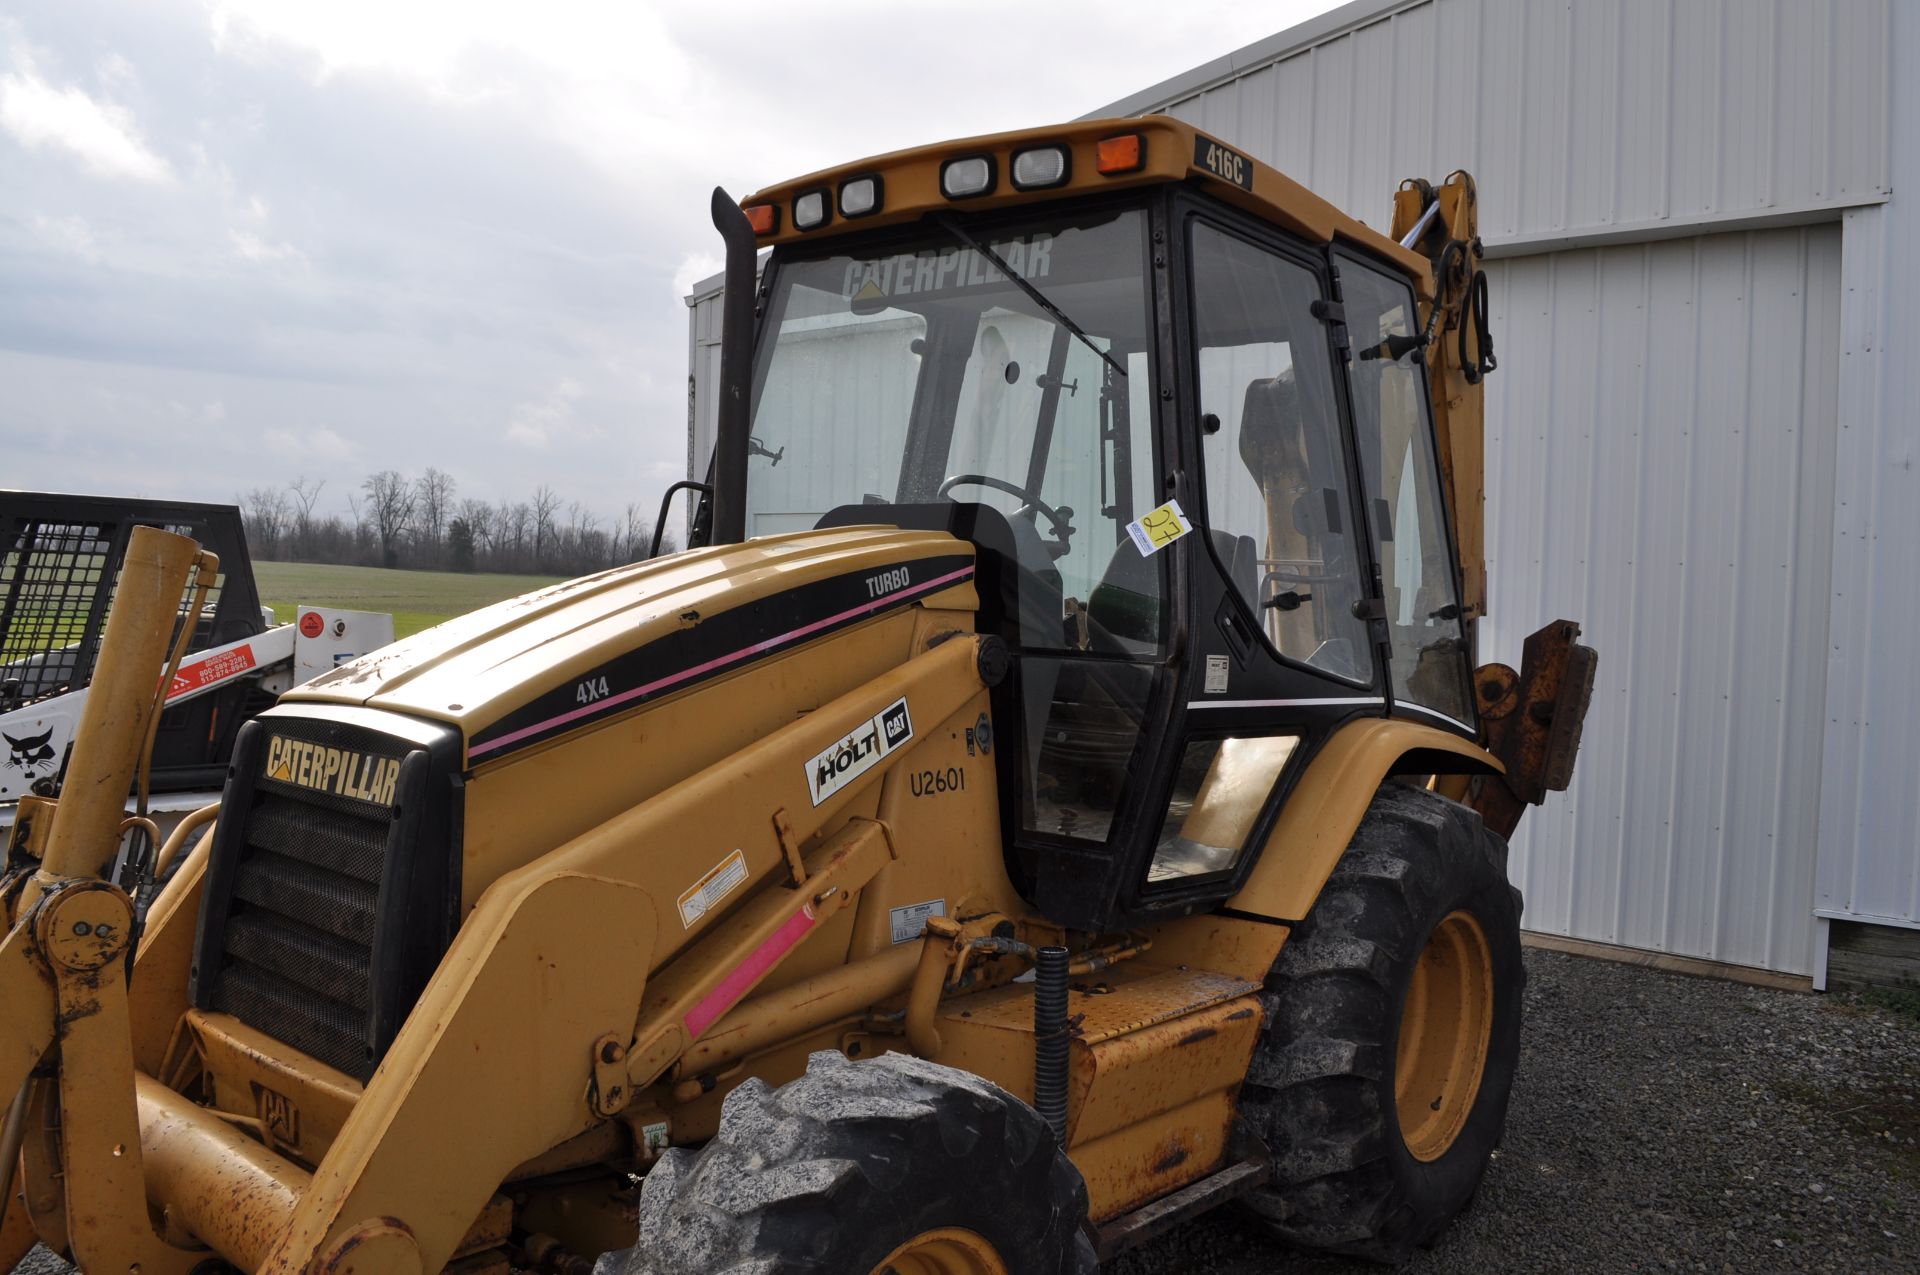 CAT 416C backhoe, 88” bucket, 19.5-24 rear, 12.5/80-18 front, 4x4, 18” and 24” digging buckets - Image 24 of 35